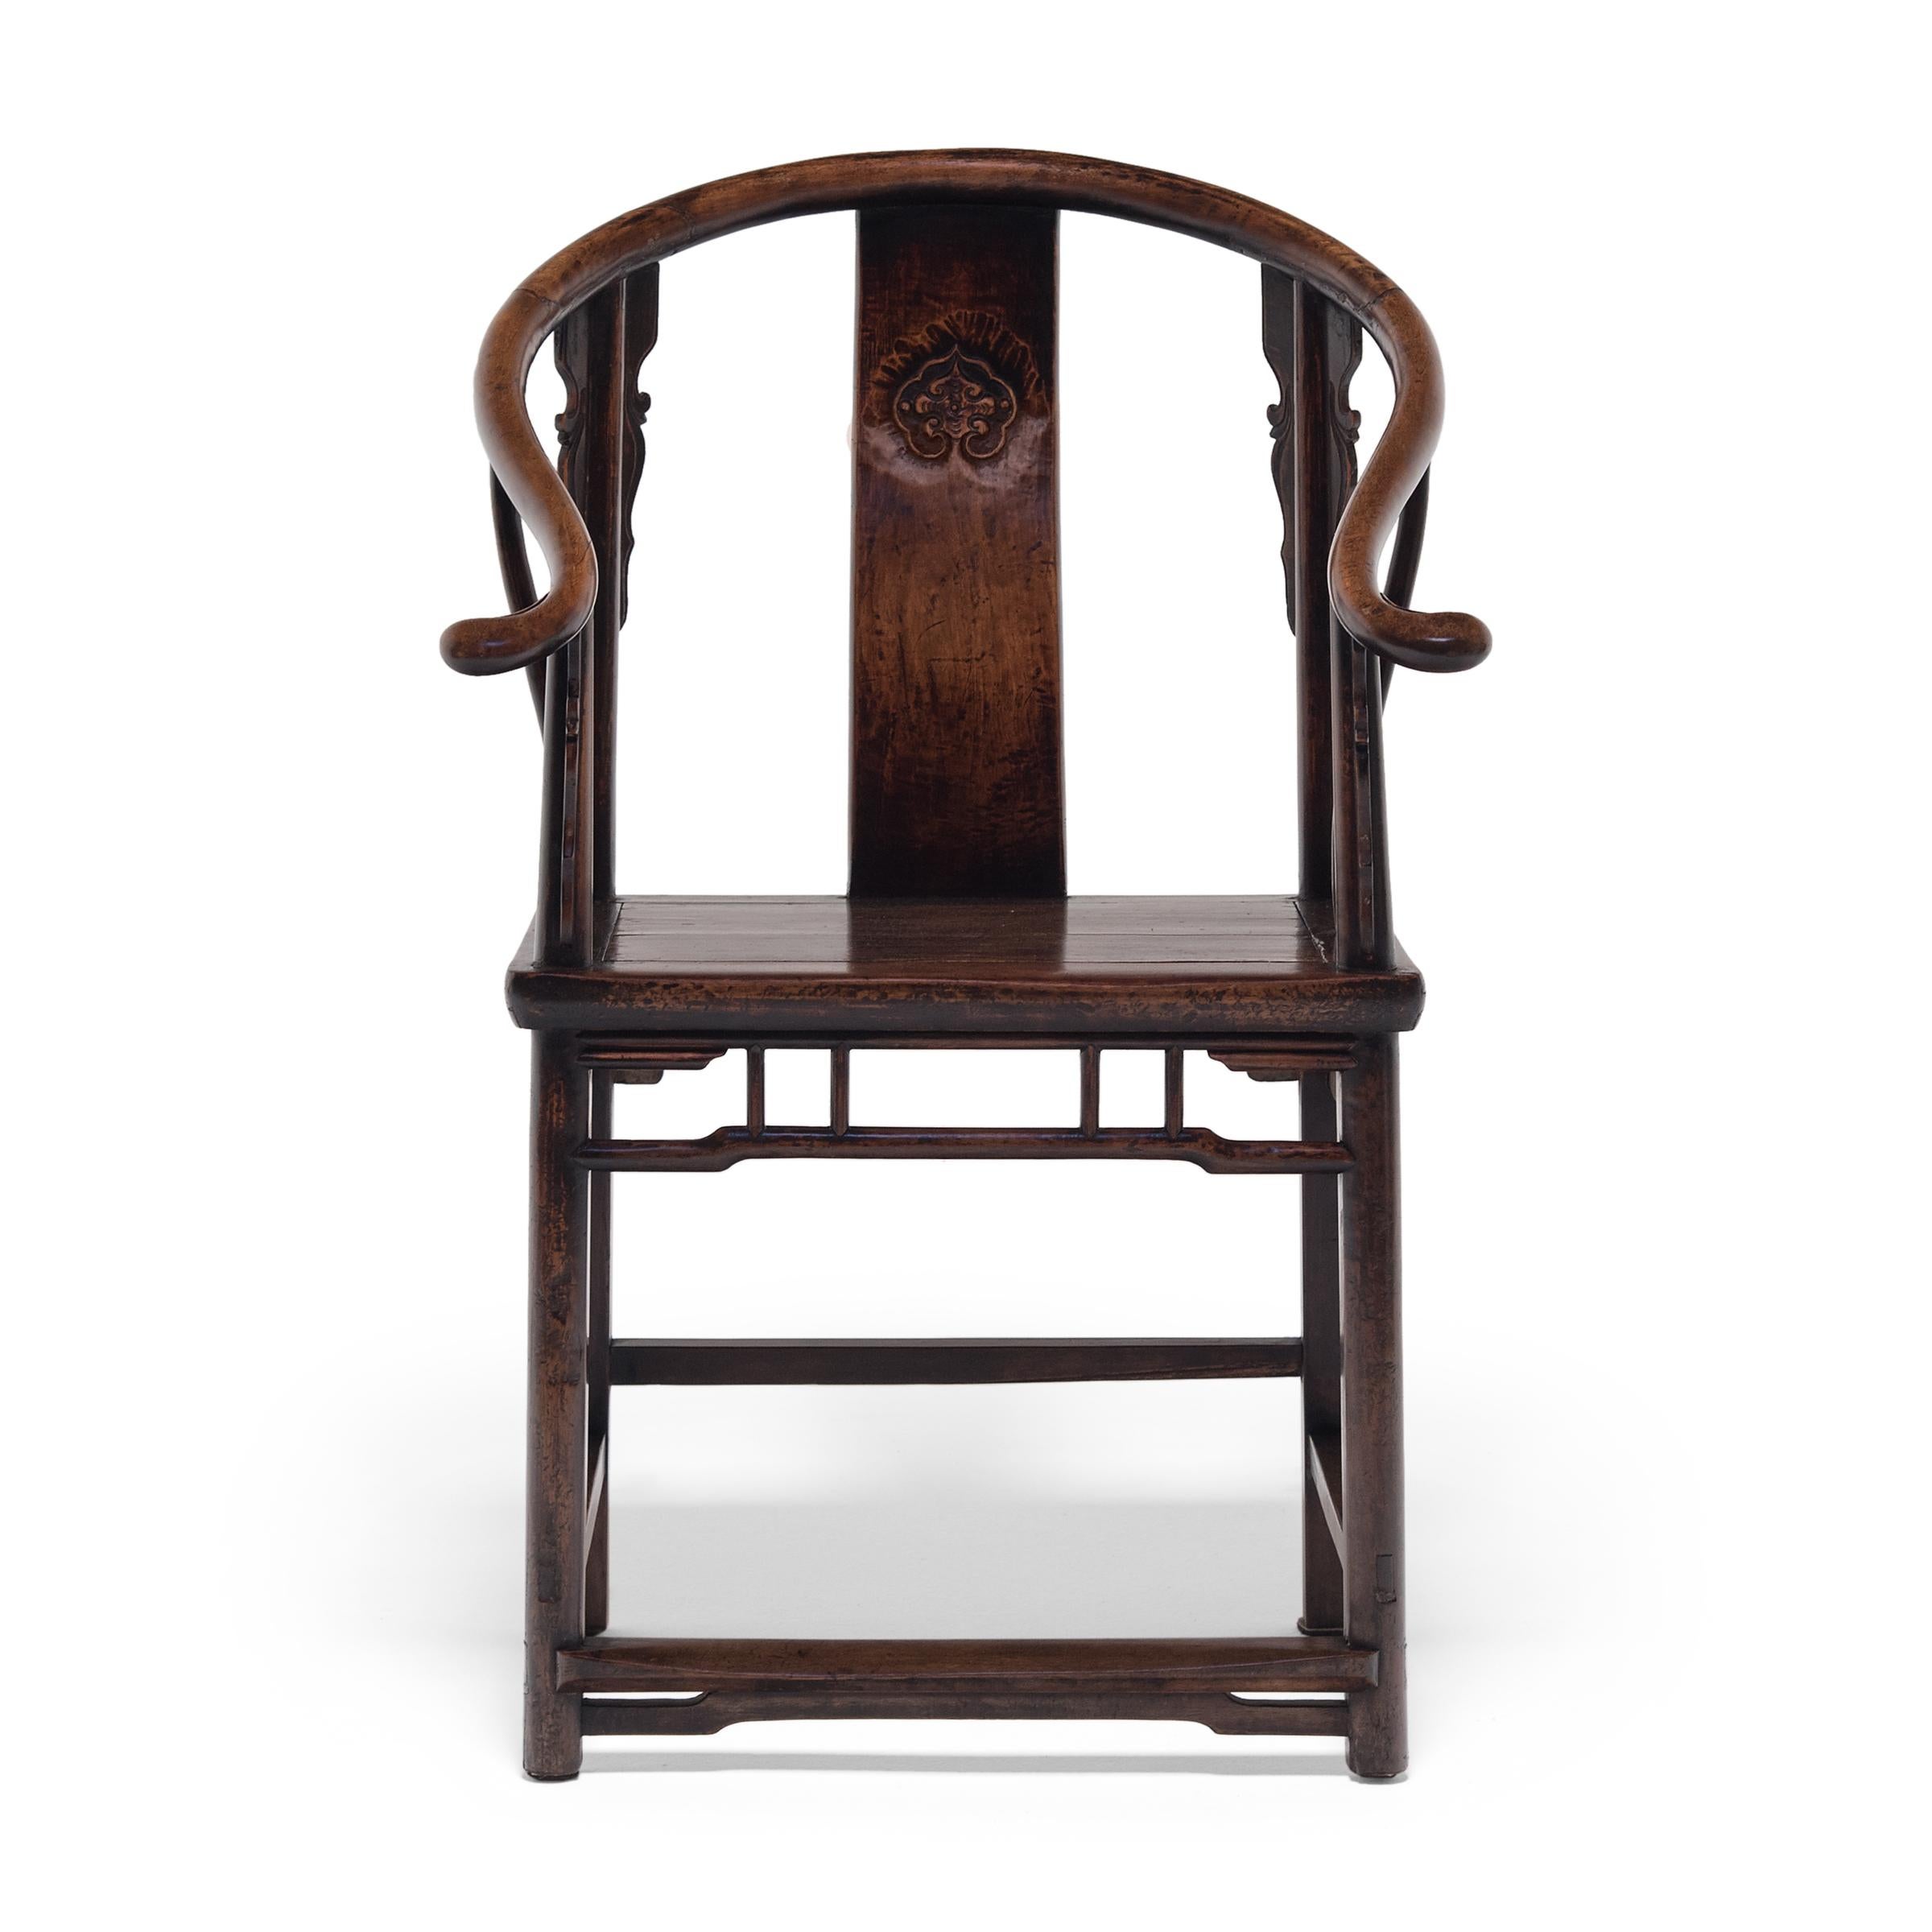 Prior to the 10th century, Chinese society eschewed raised seats in favor of mats. The rising popularity of chairs and other forms of elevated seating led craftsmen to adapt traditional cabinetry and architecture techniques to the human body. In the